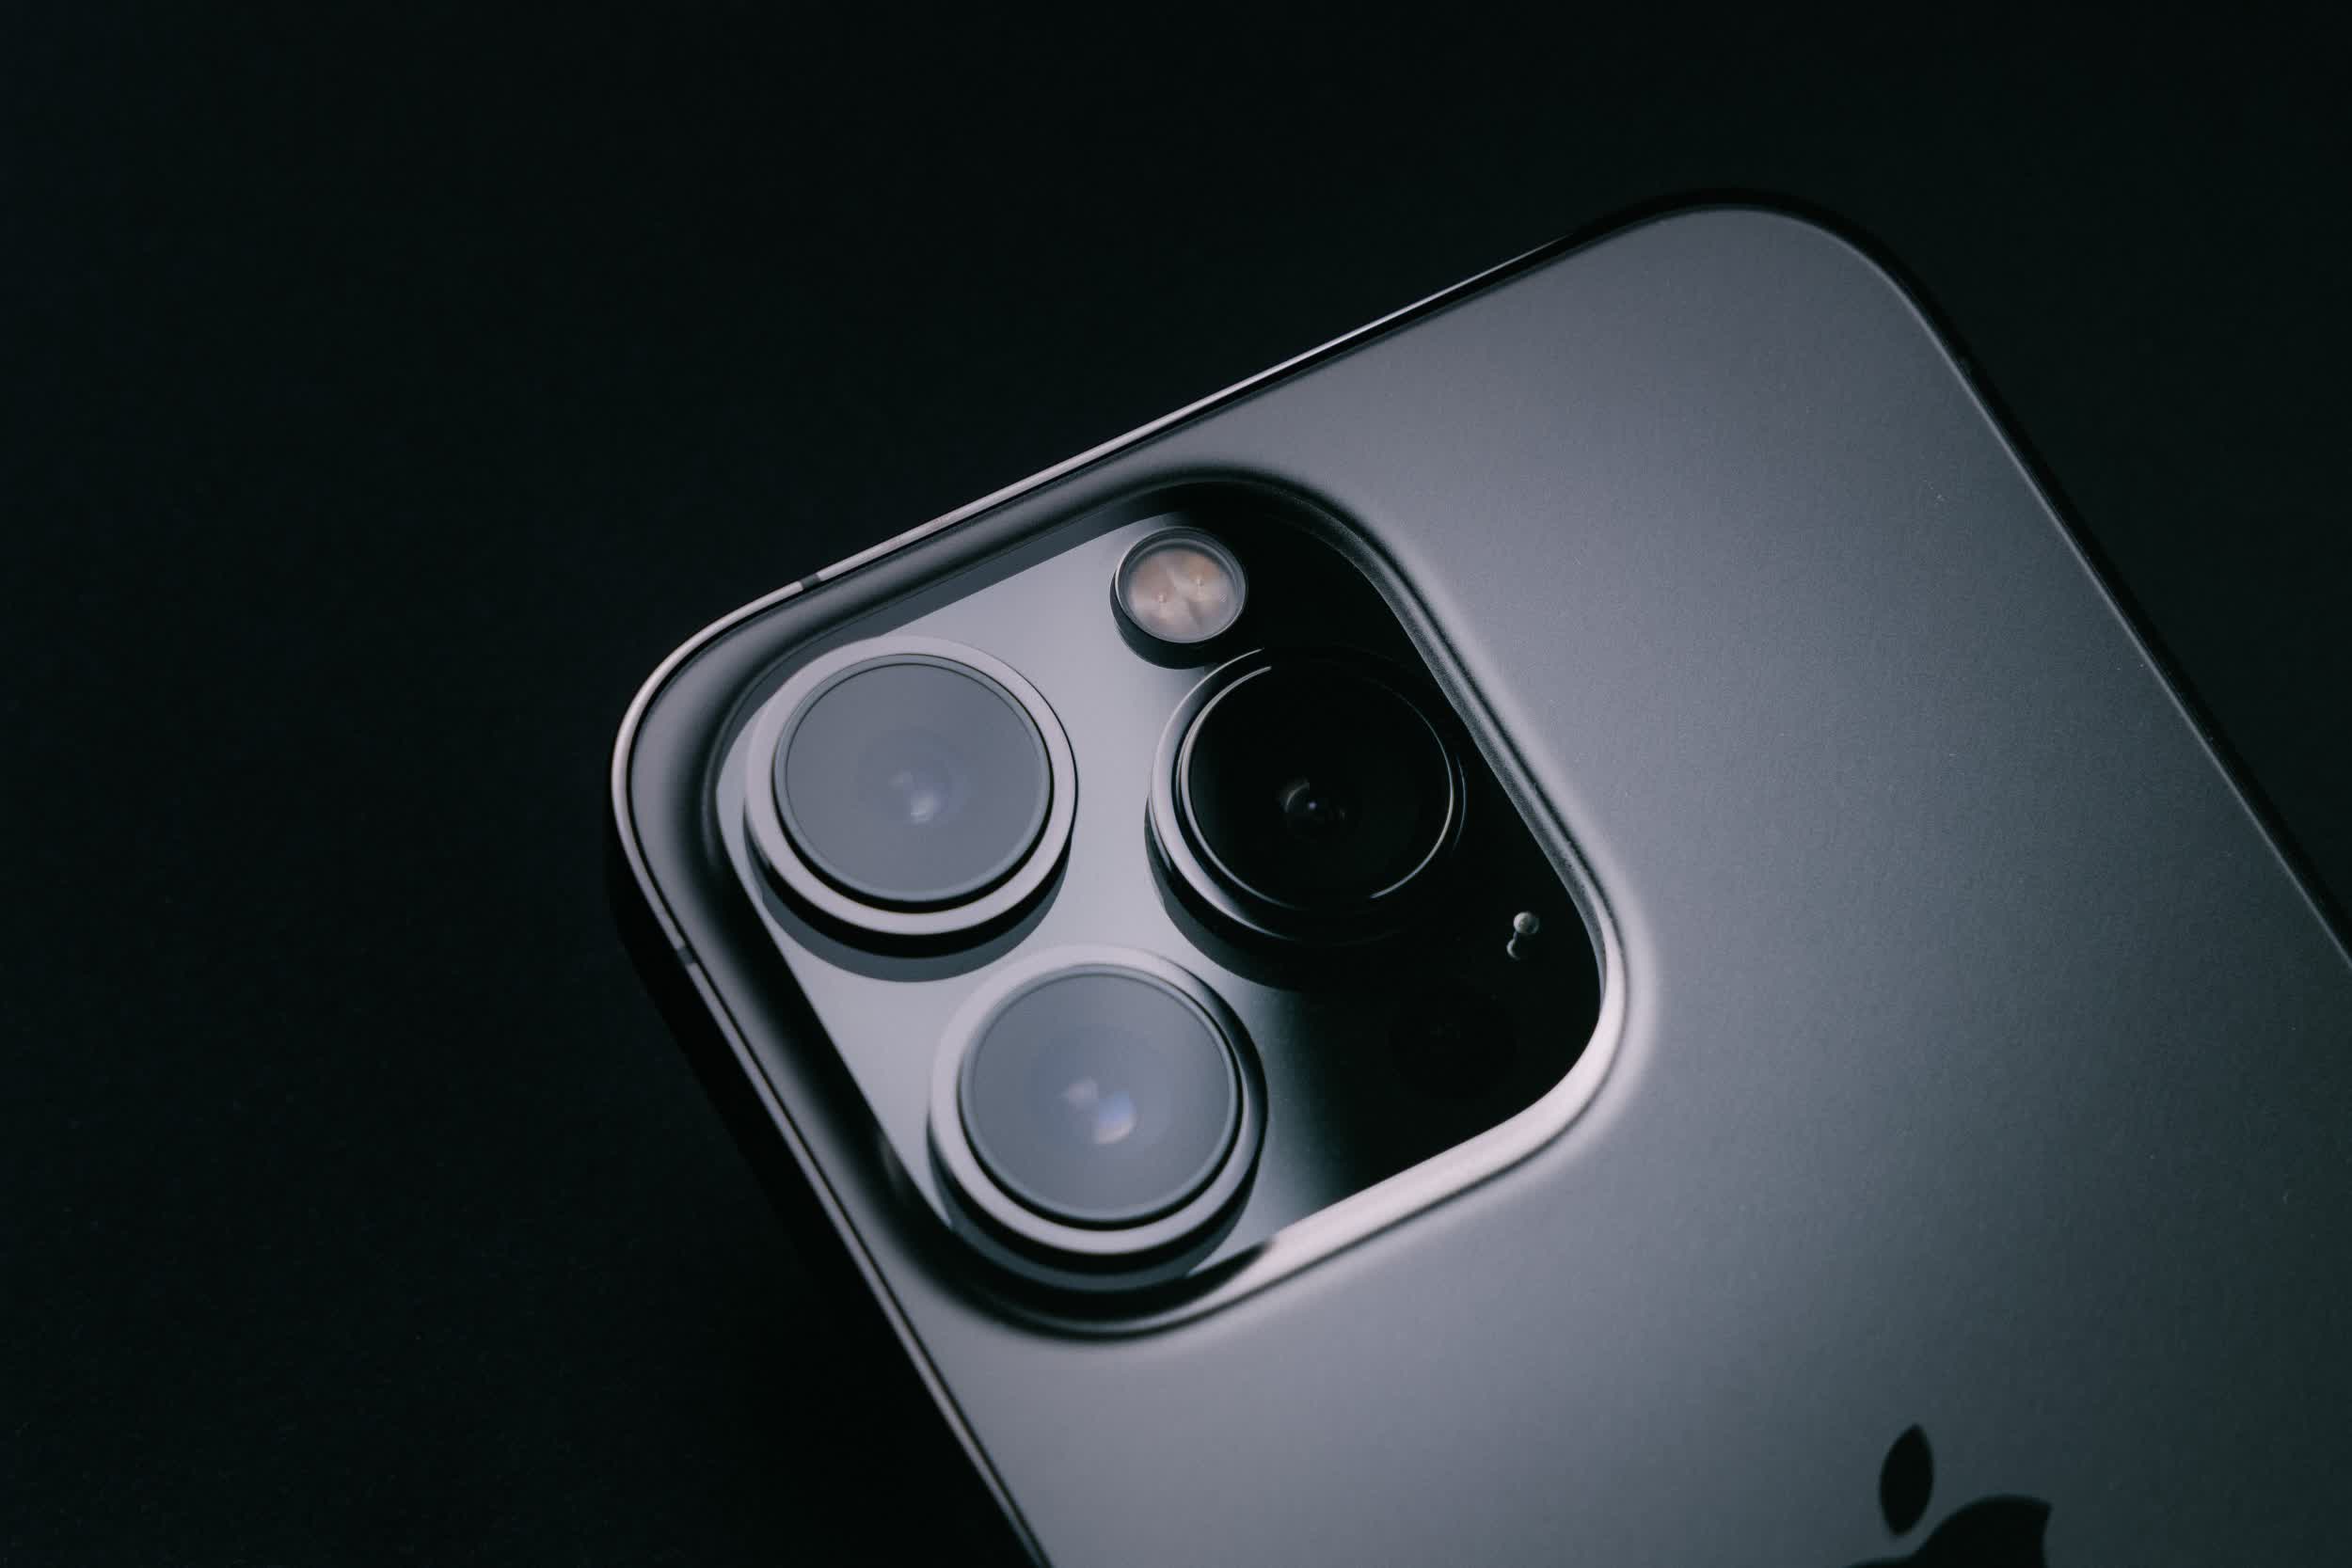 Flagship iPhone 14 models could have a larger camera bump to accommodate new 48MP sensor